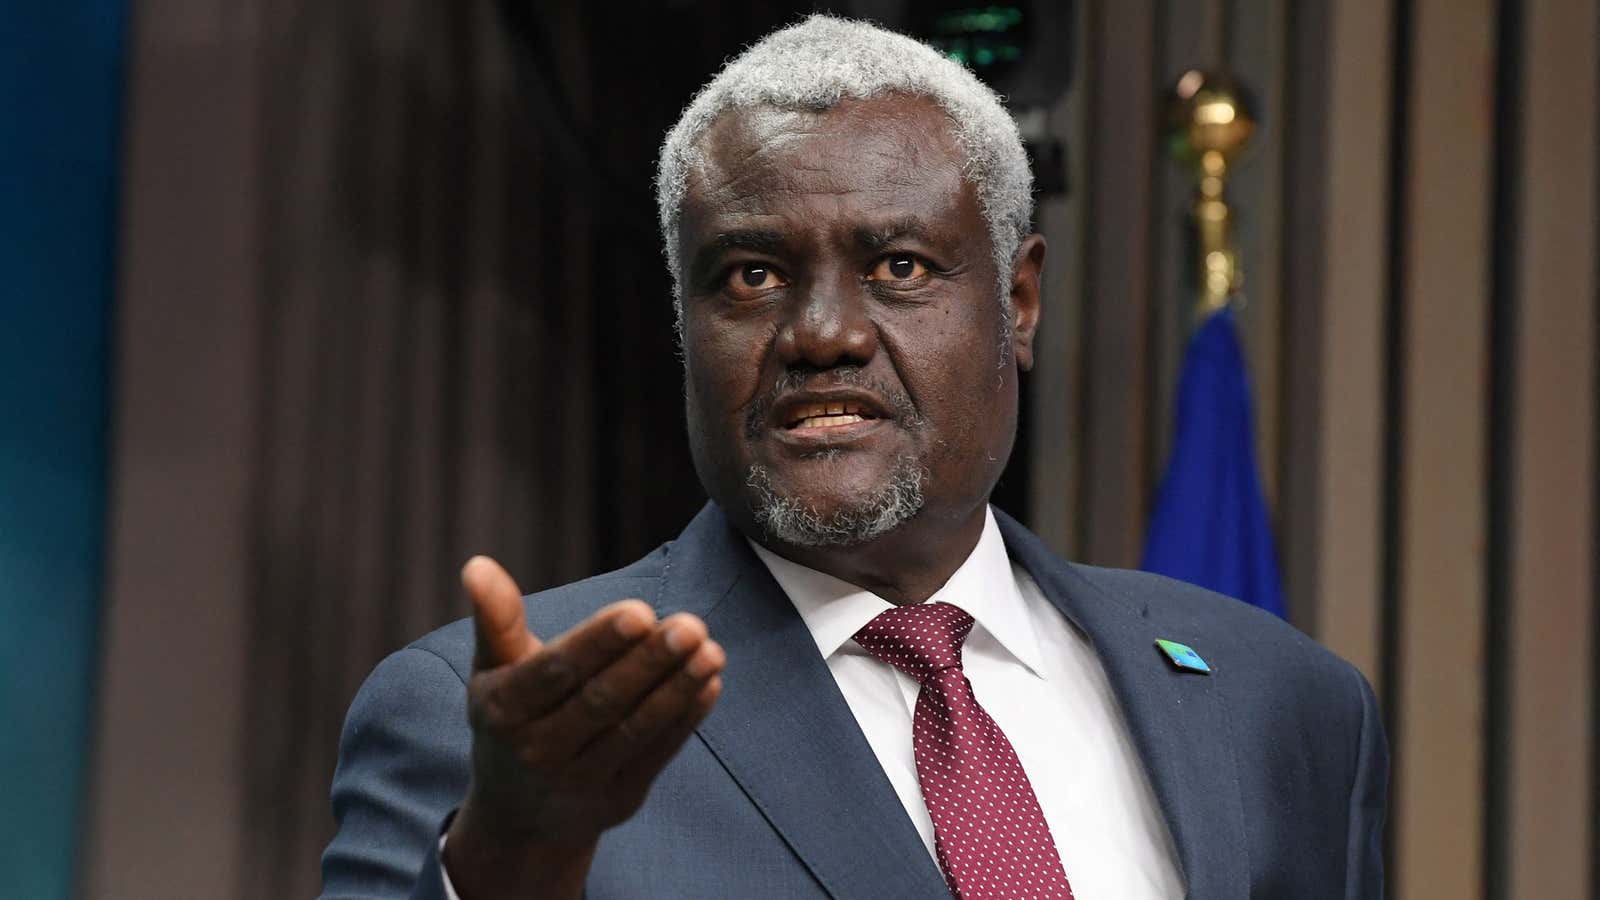 African Union Commission Chairperson Mahamat Moussa Faki.